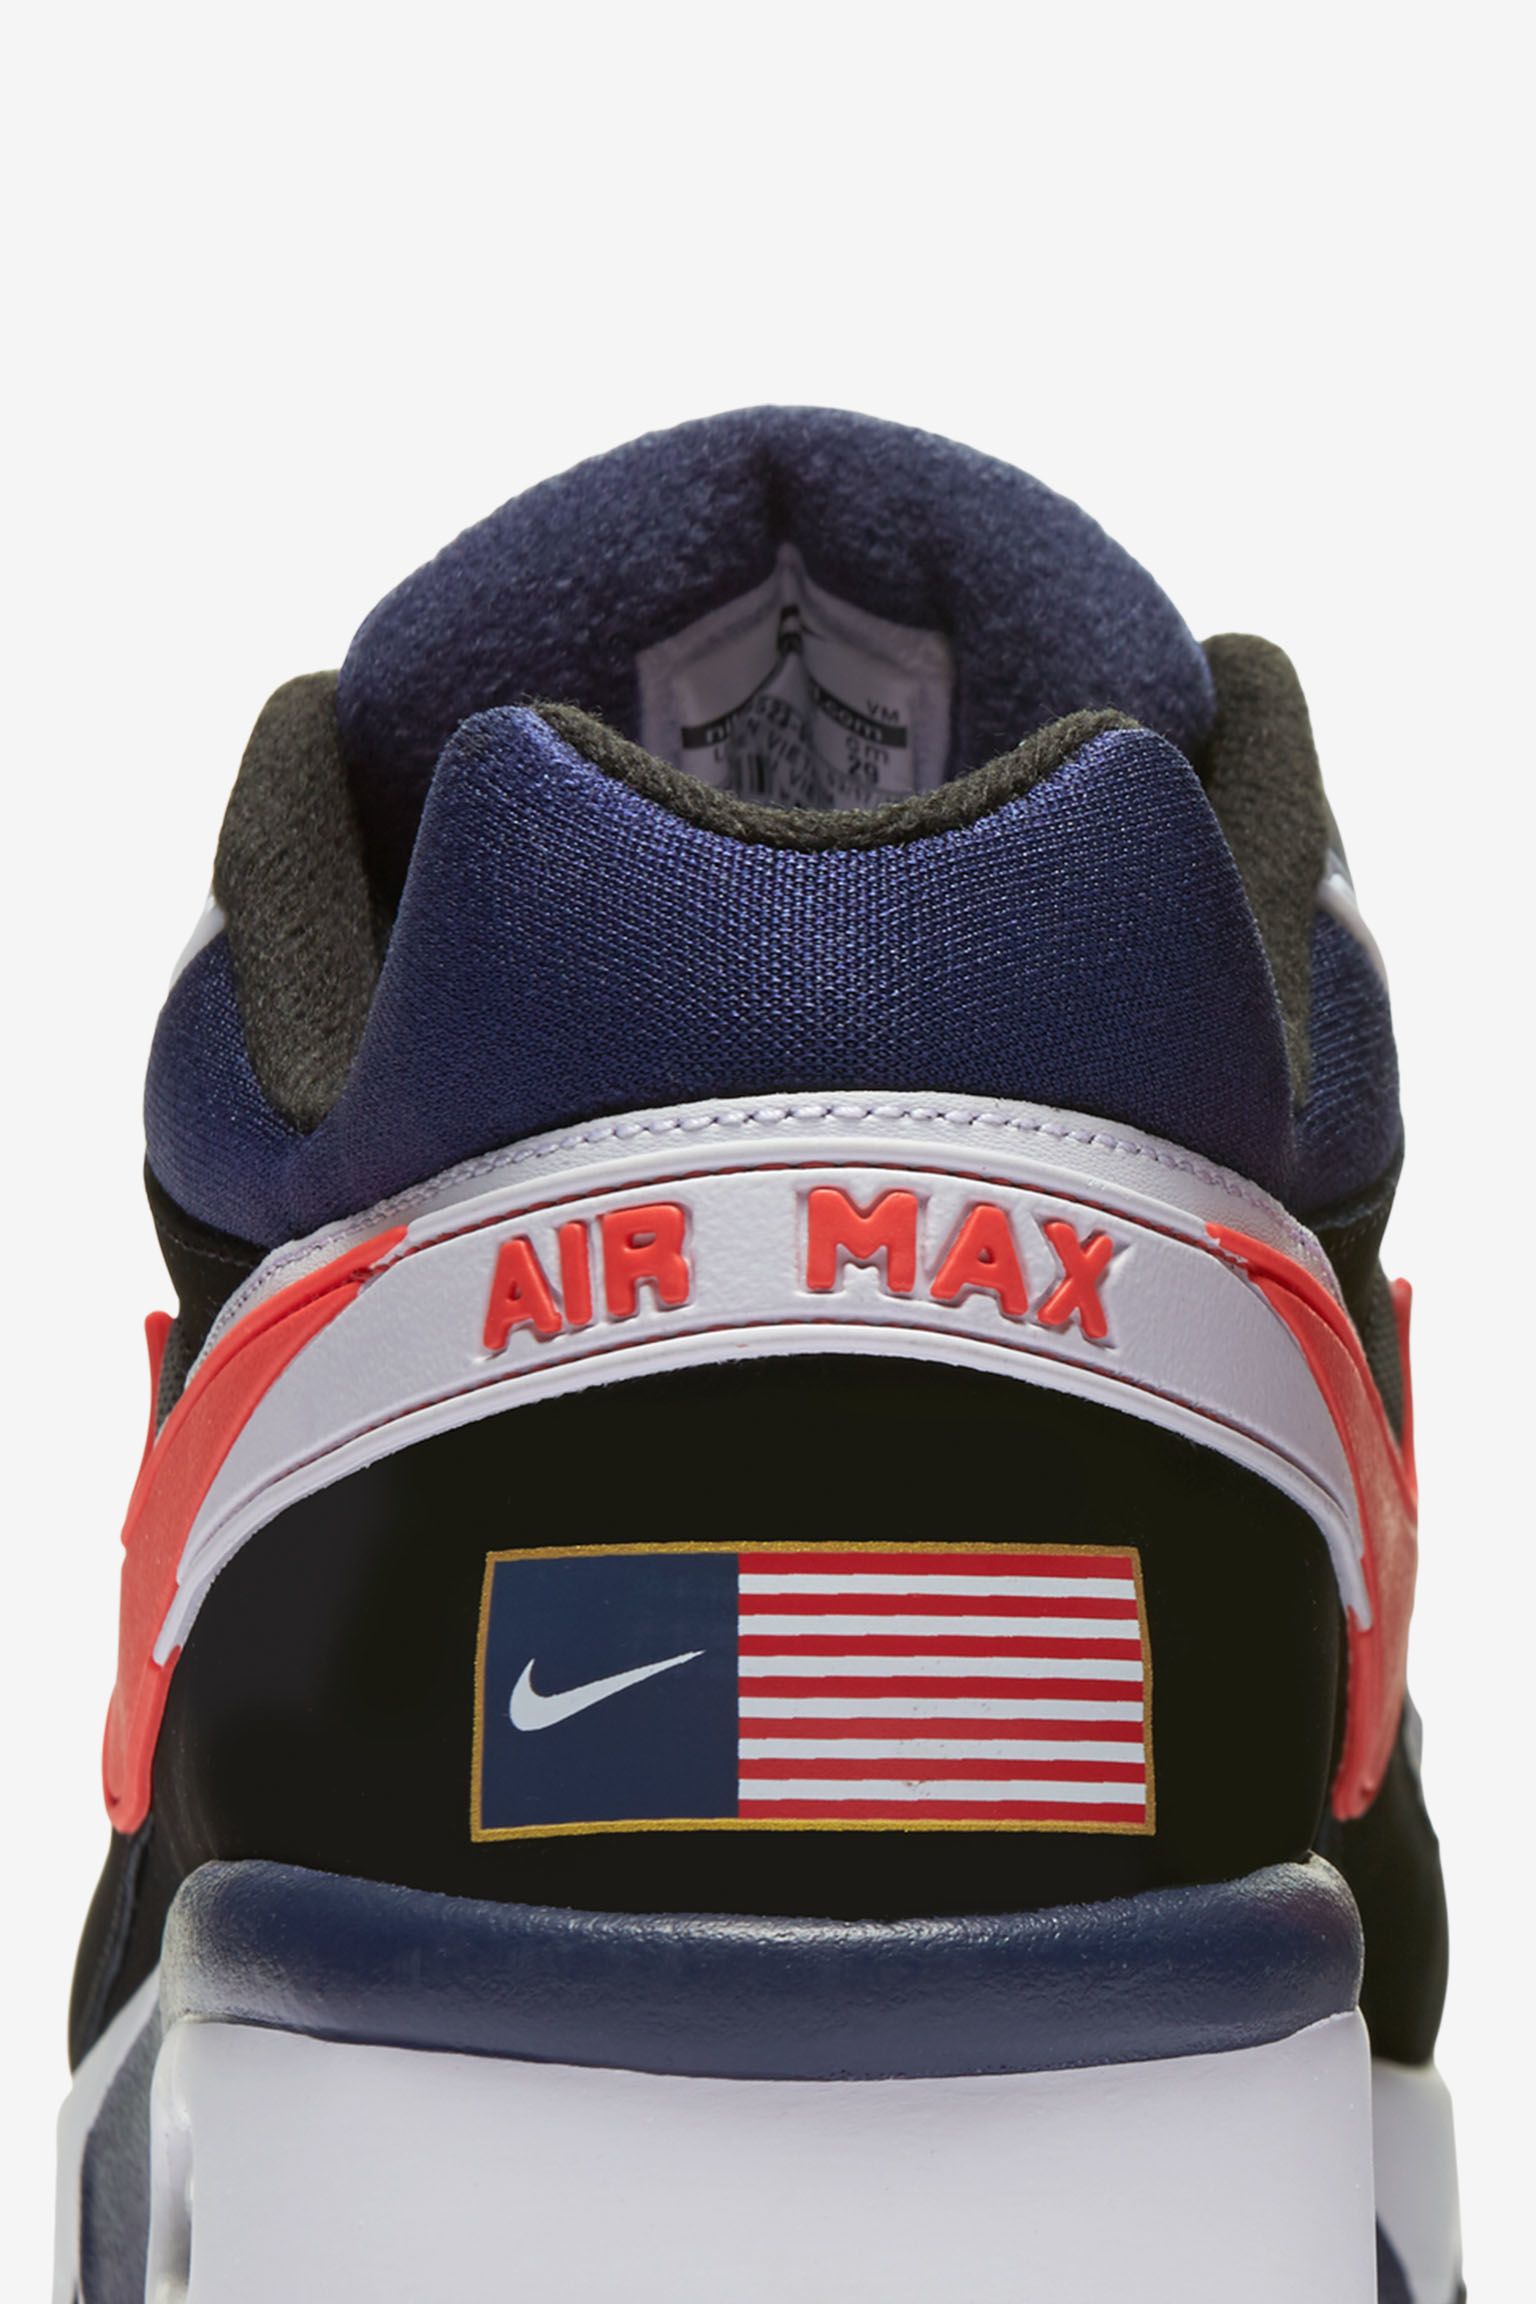 Nike Air BW 'USA' Release Date. SNKRS